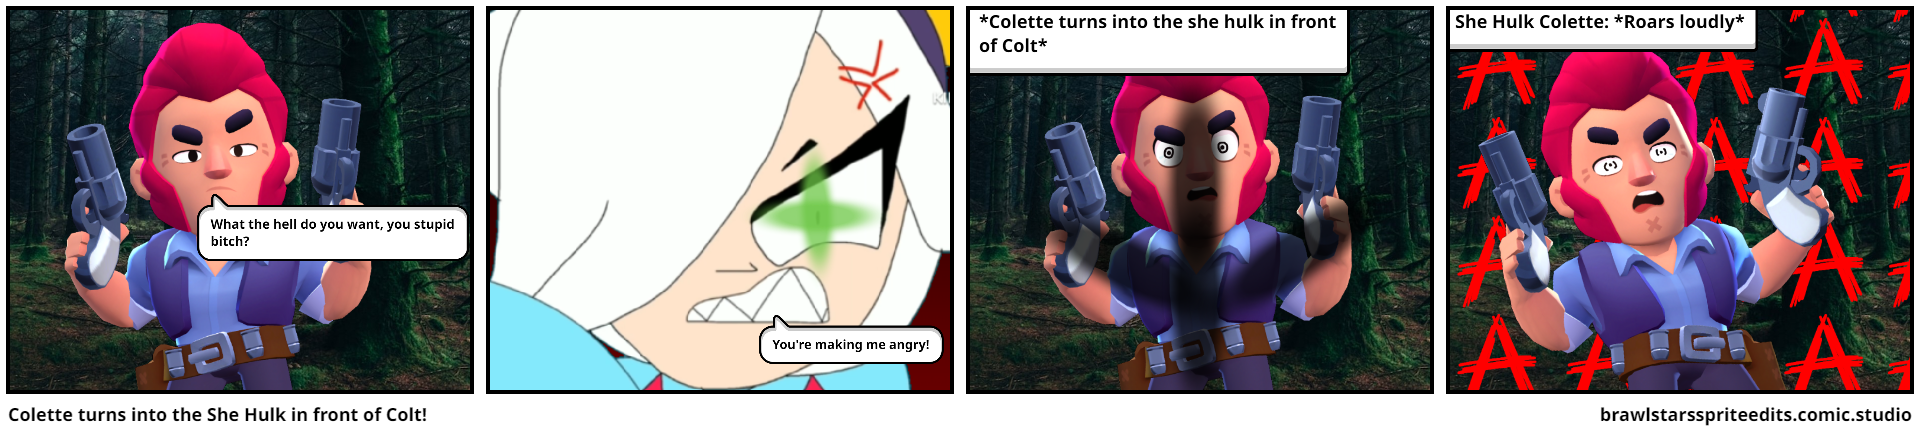 Colette turns into the She Hulk in front of Colt!